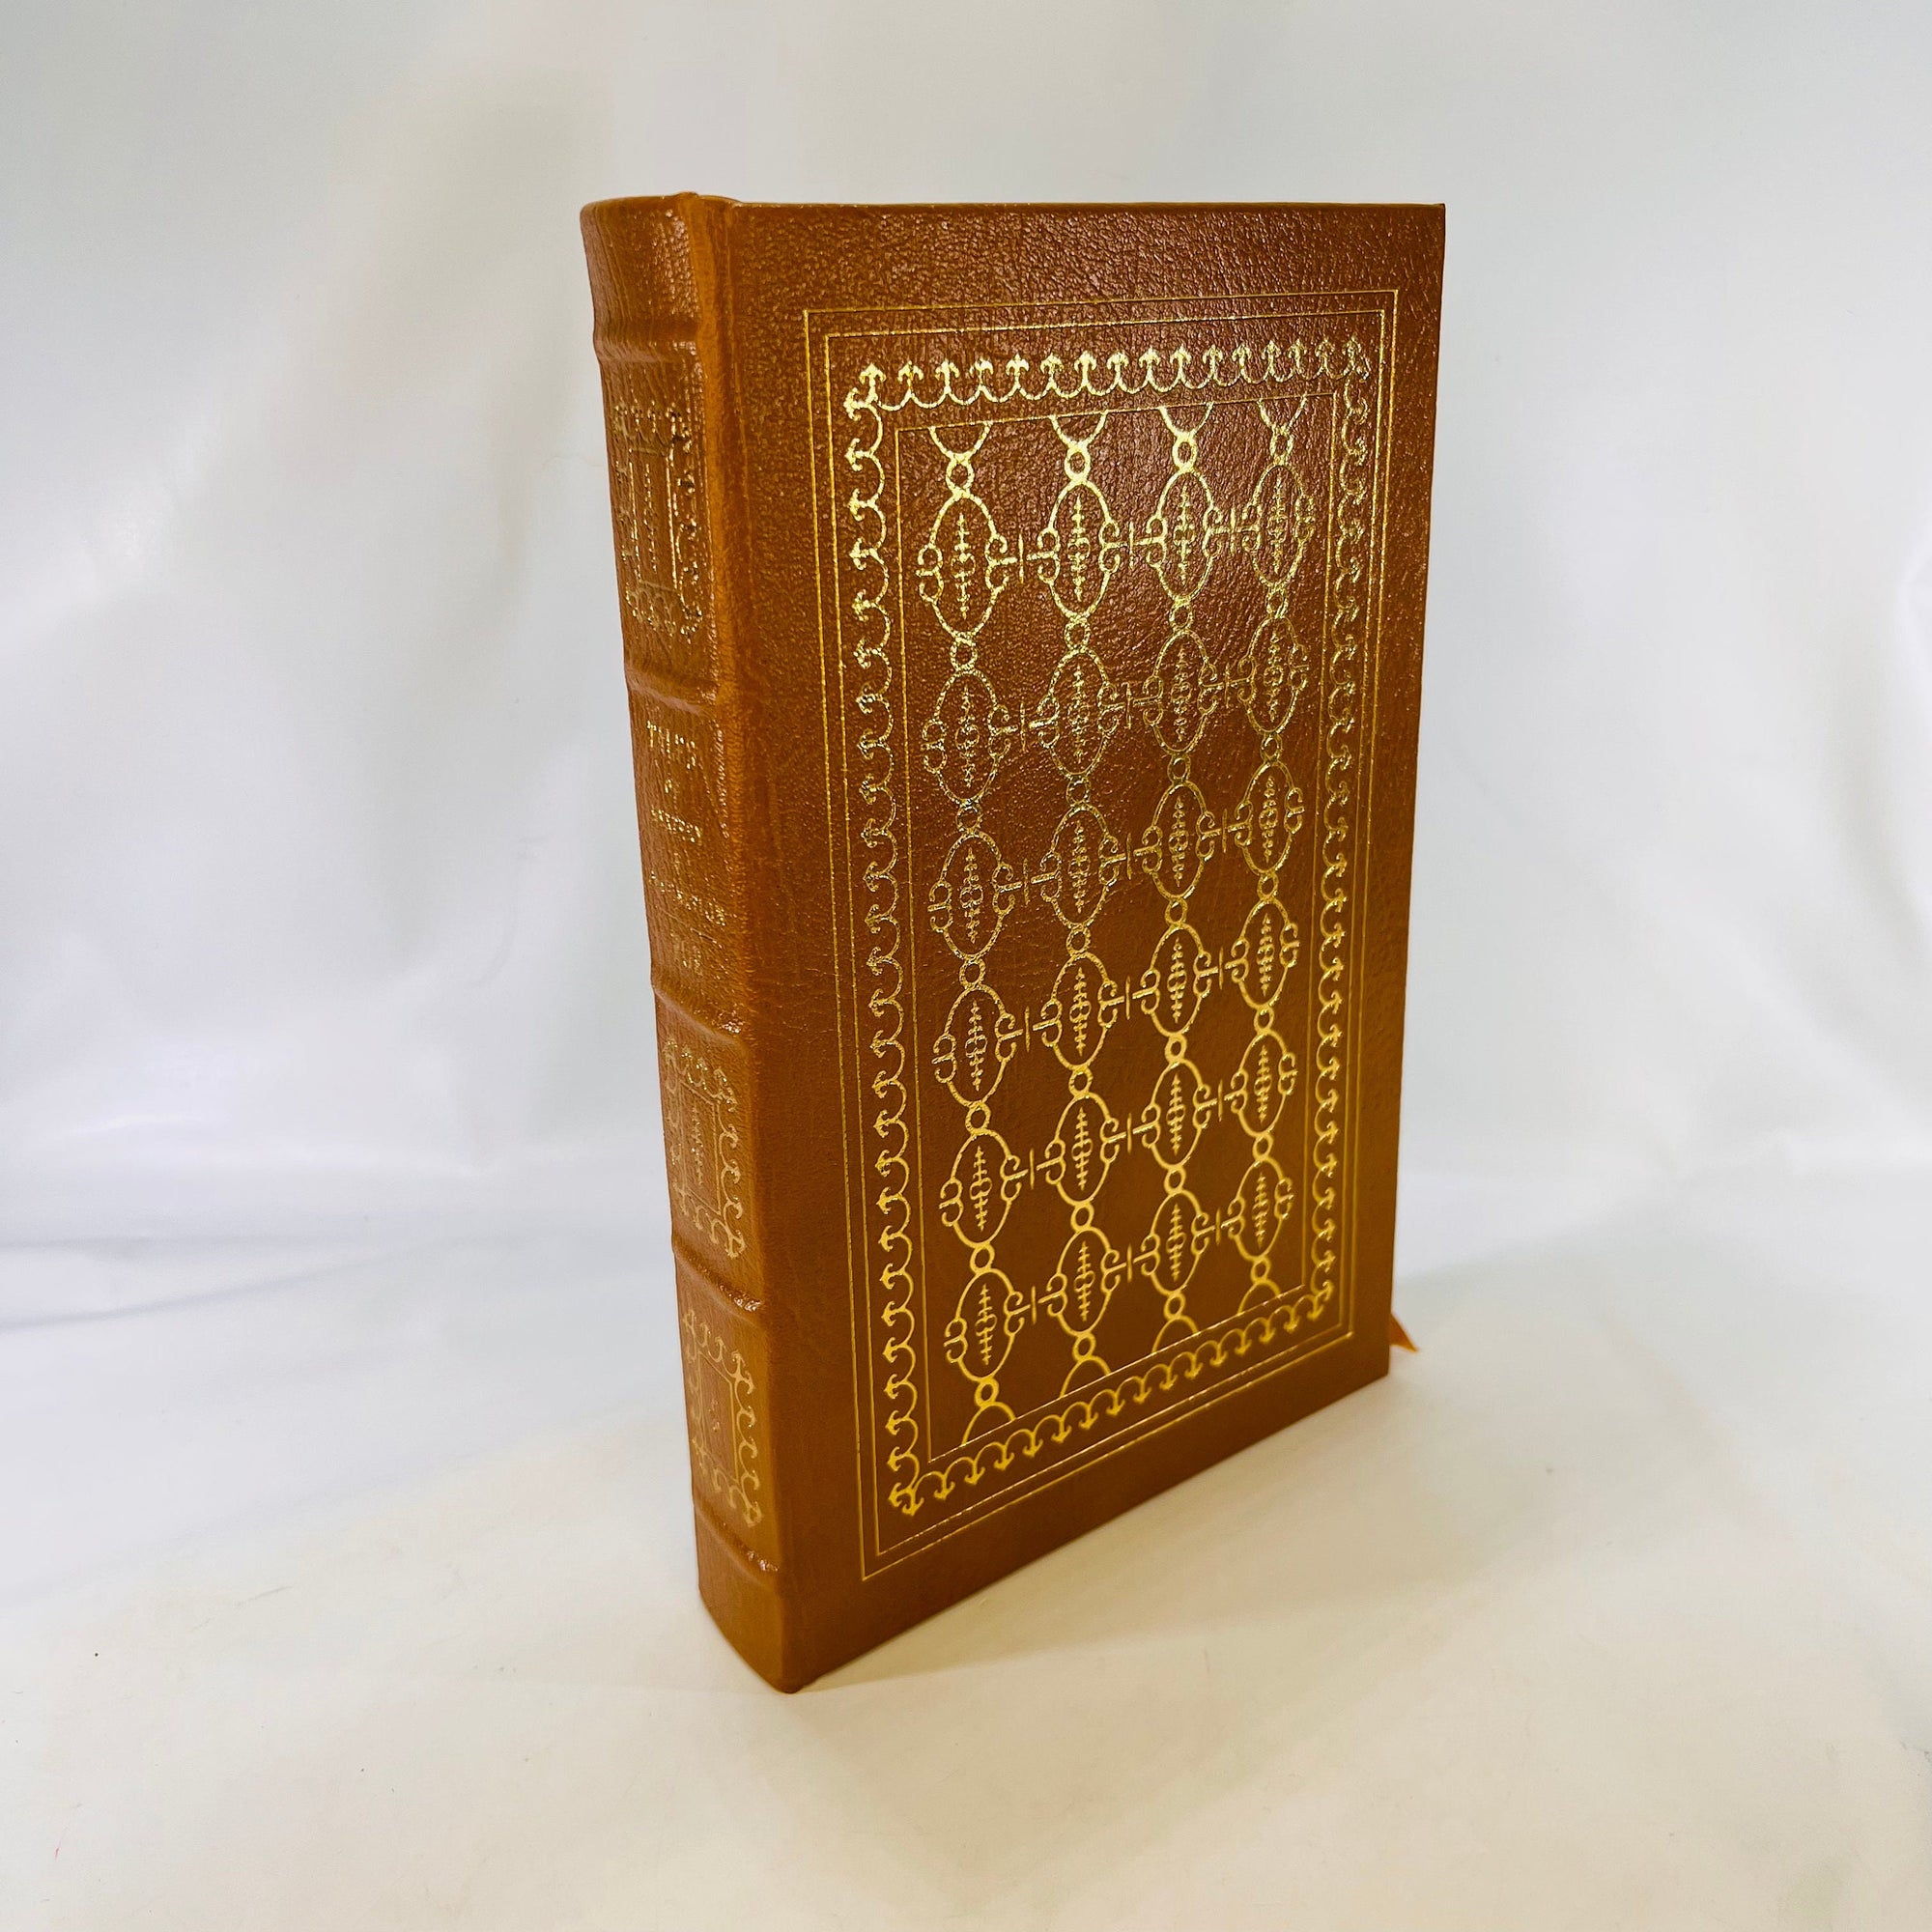 Tales of Mystery & Imagination by Edgar Allan Poe 1975 Easton Press part of the 100 Greatest Books .